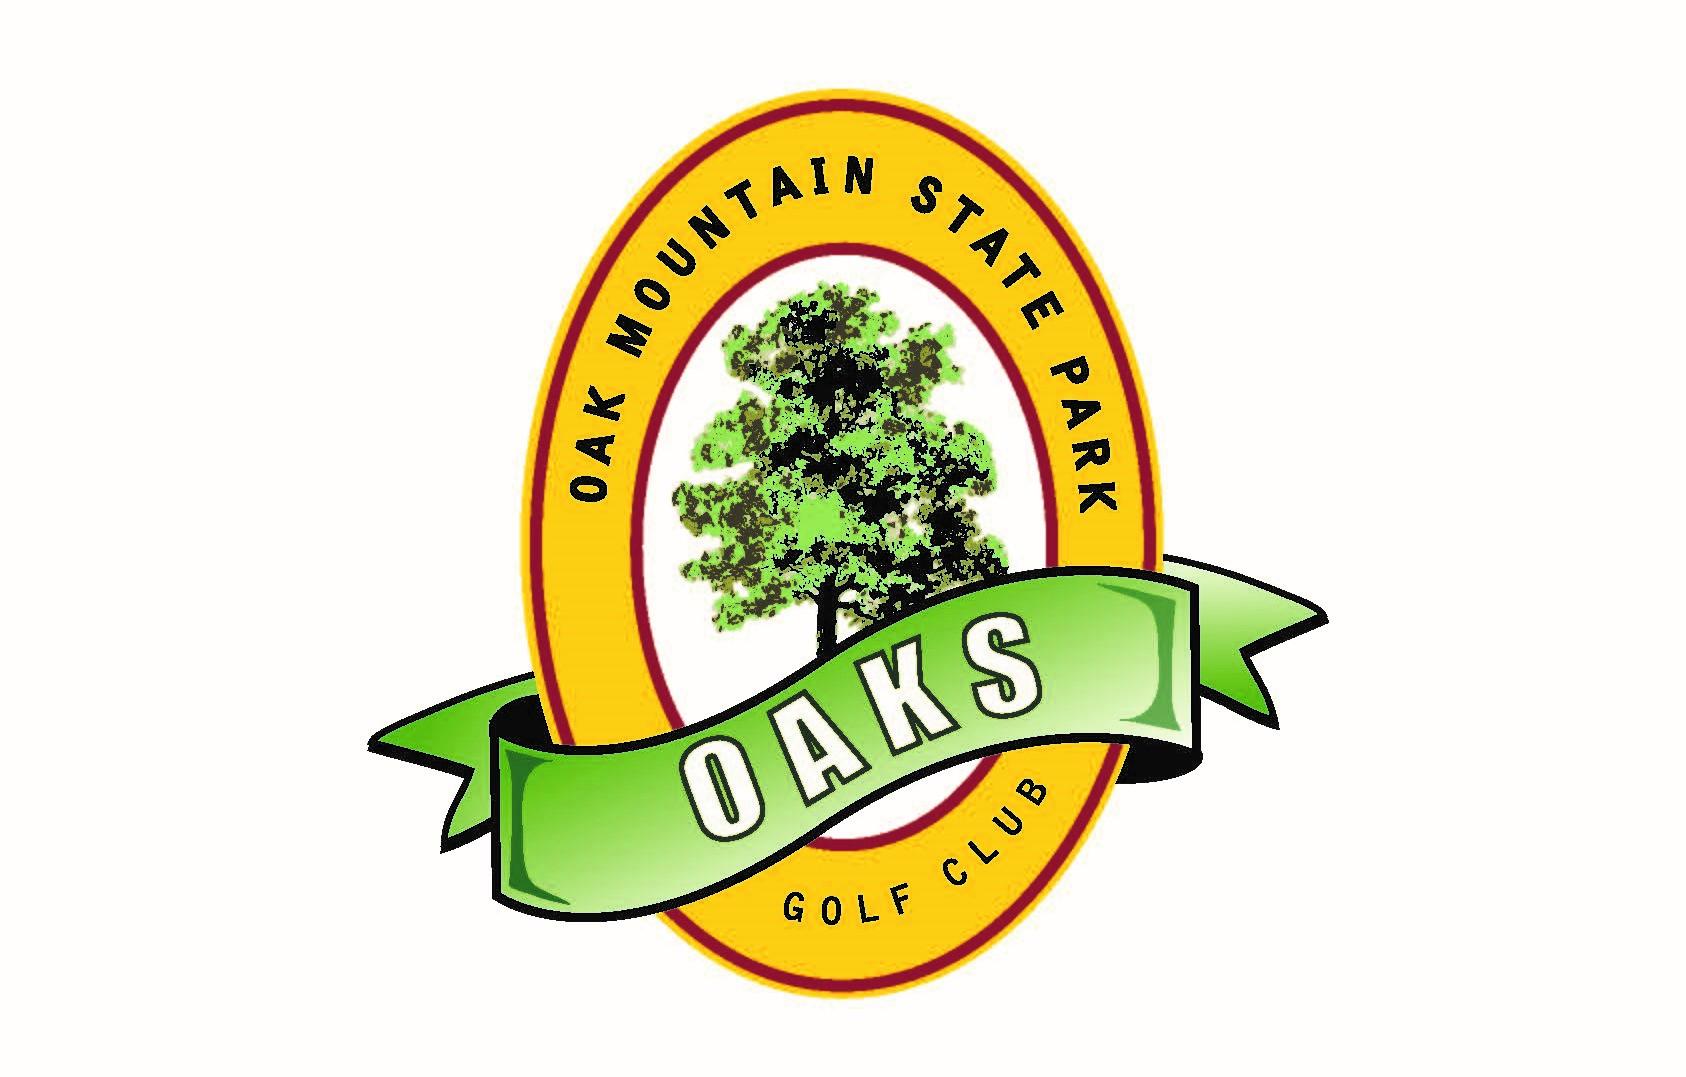 The Oaks Golf Course at Oak Mountain State Park